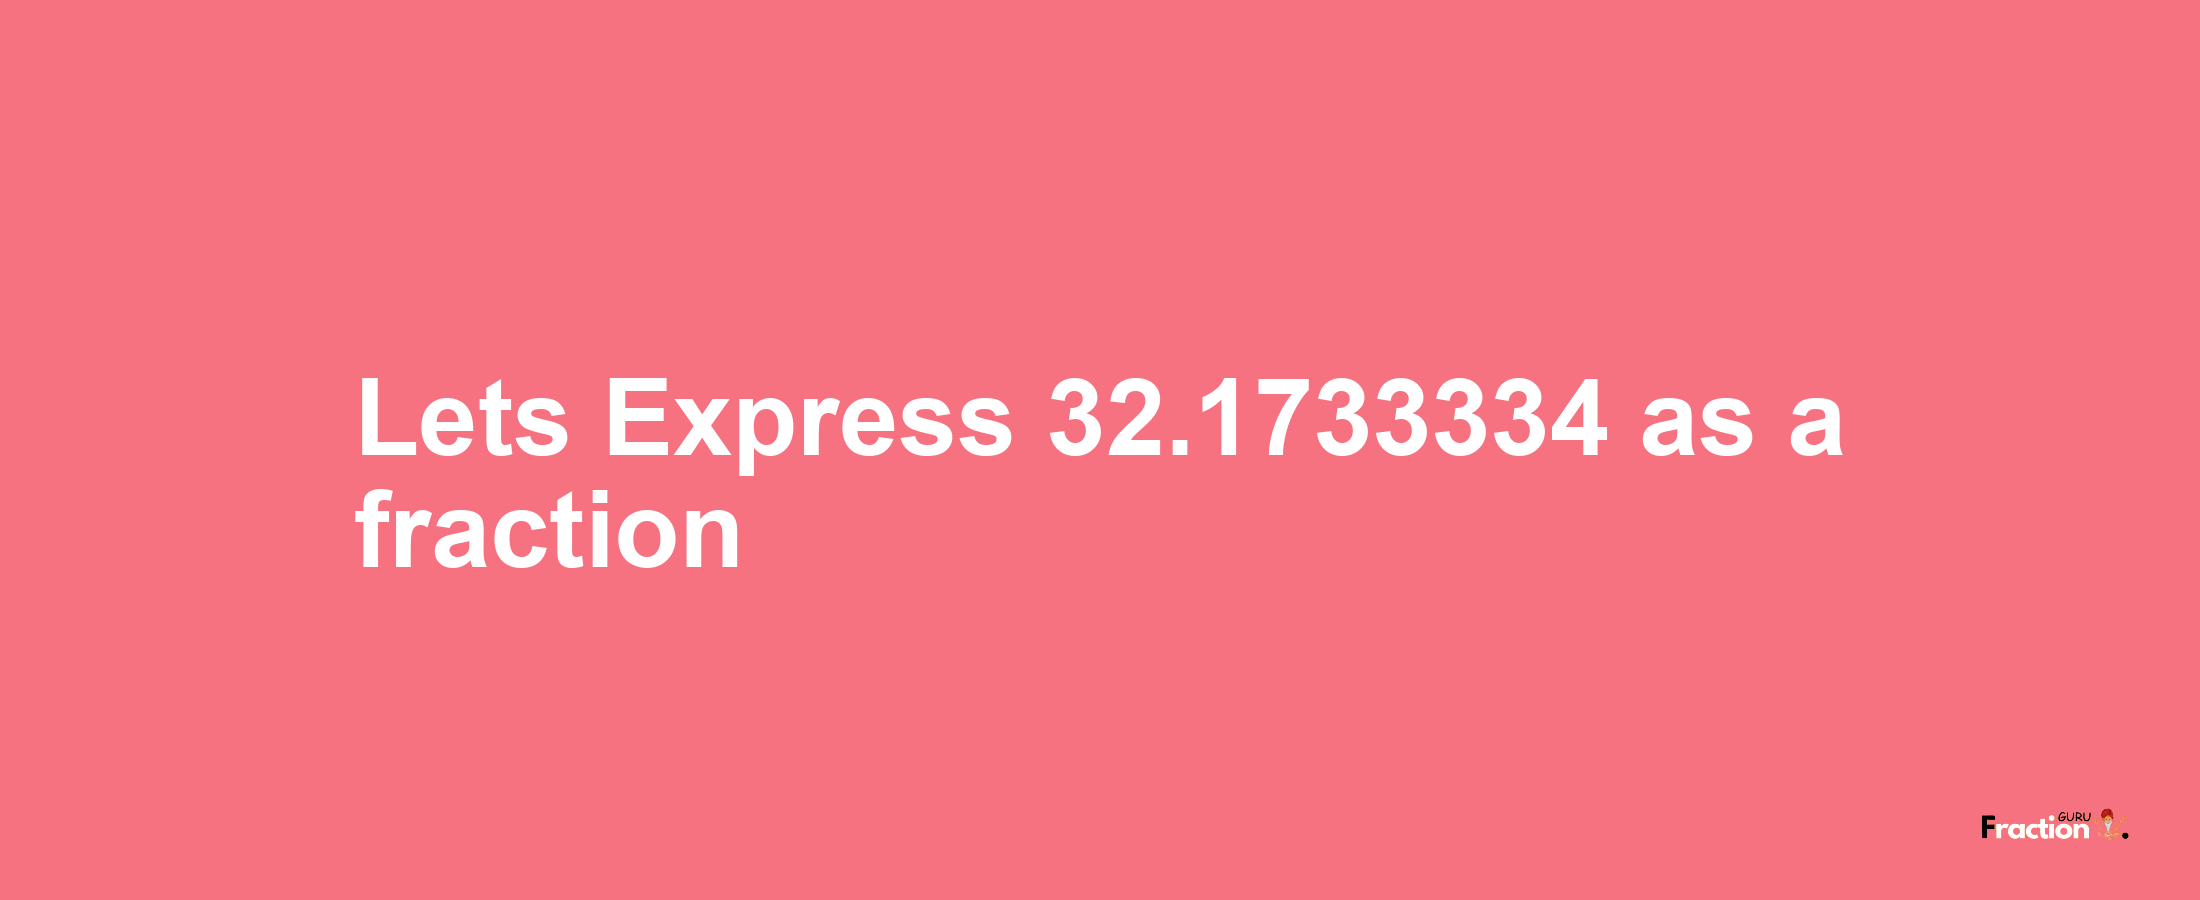 Lets Express 32.1733334 as afraction